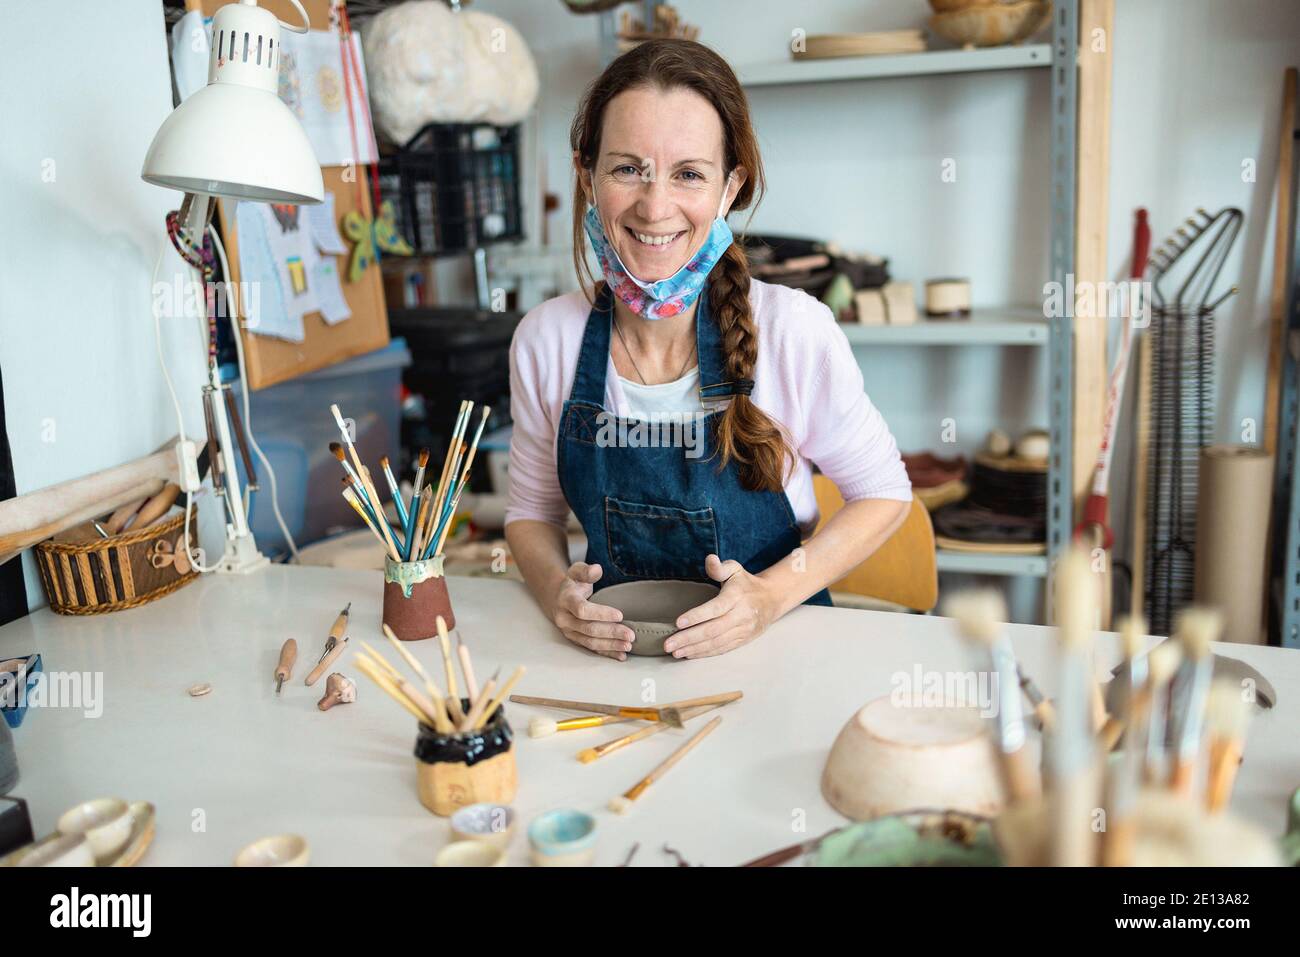 Happy artist woman molding with clay at pottery workshop - Focus on face Stock Photo